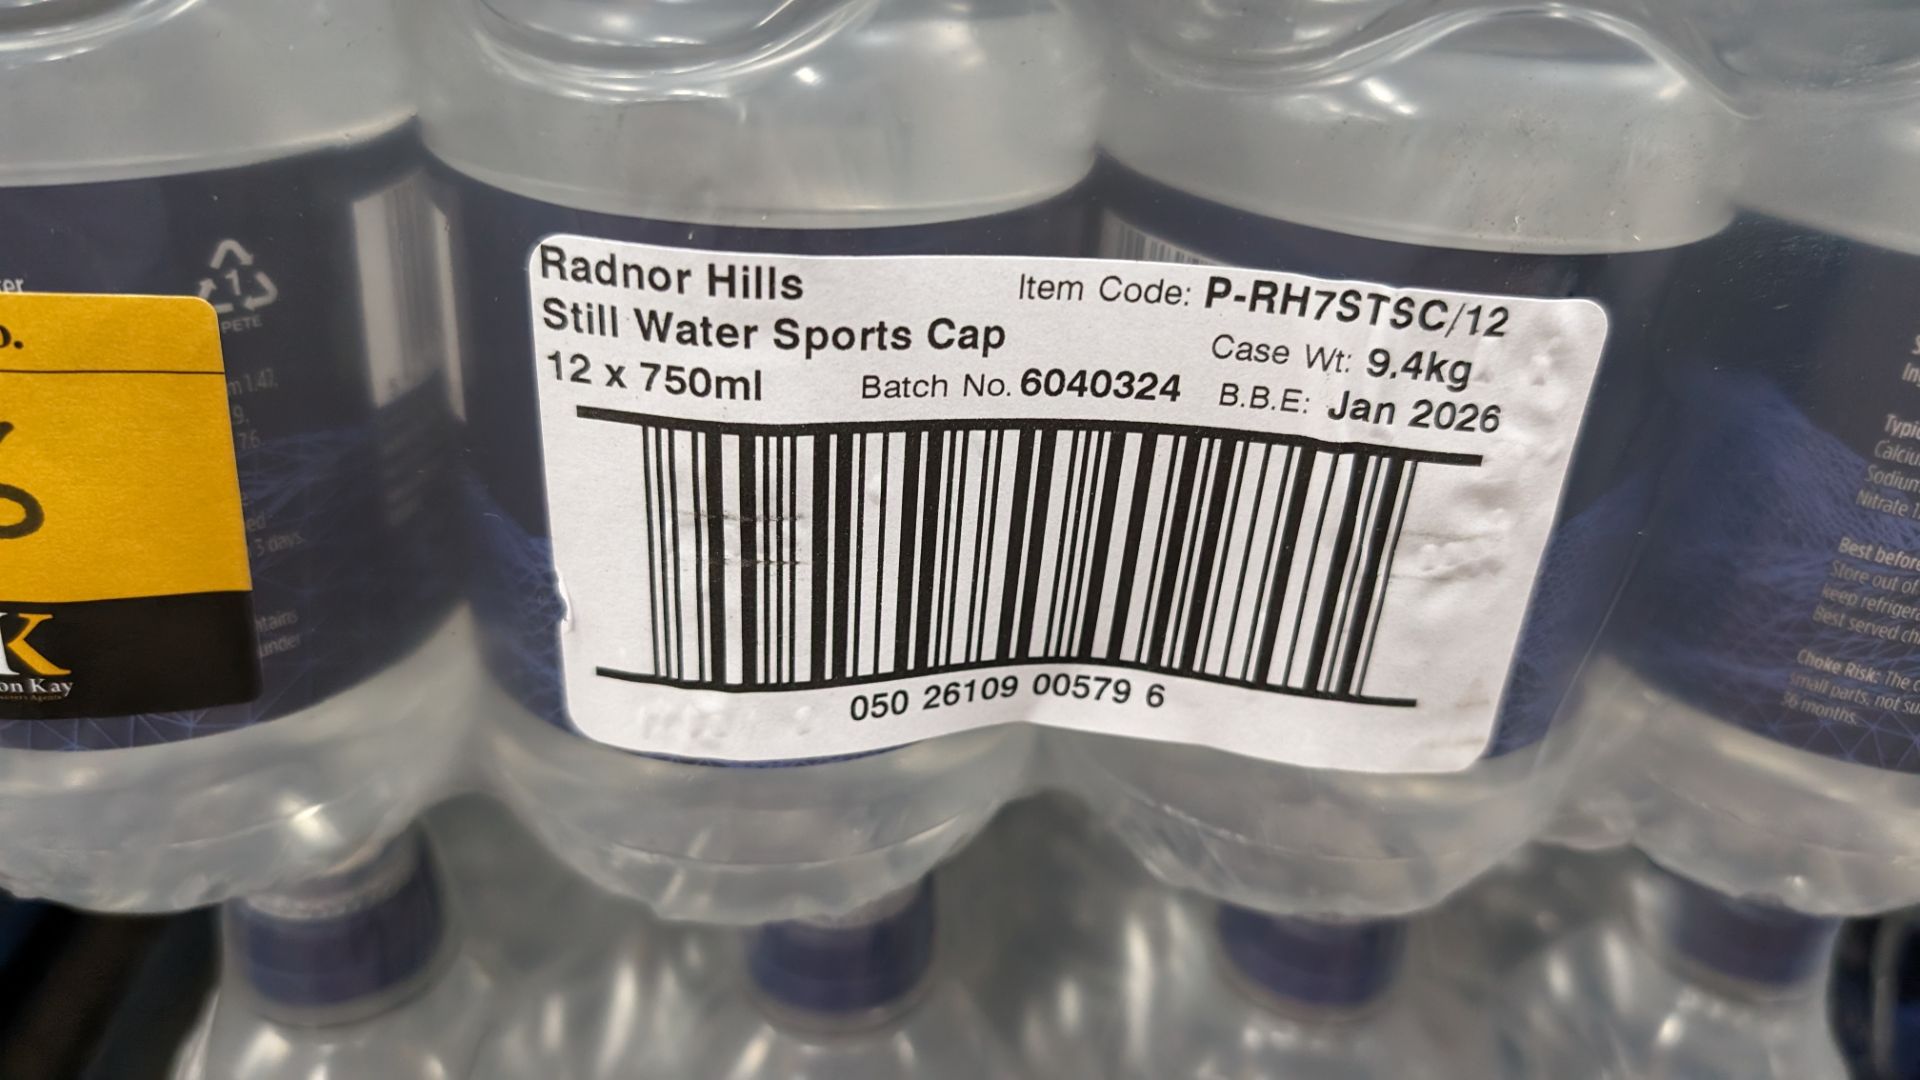 72 off 750ml bottles of Radnor Hills still water, best before date January 2026 - Image 4 of 4